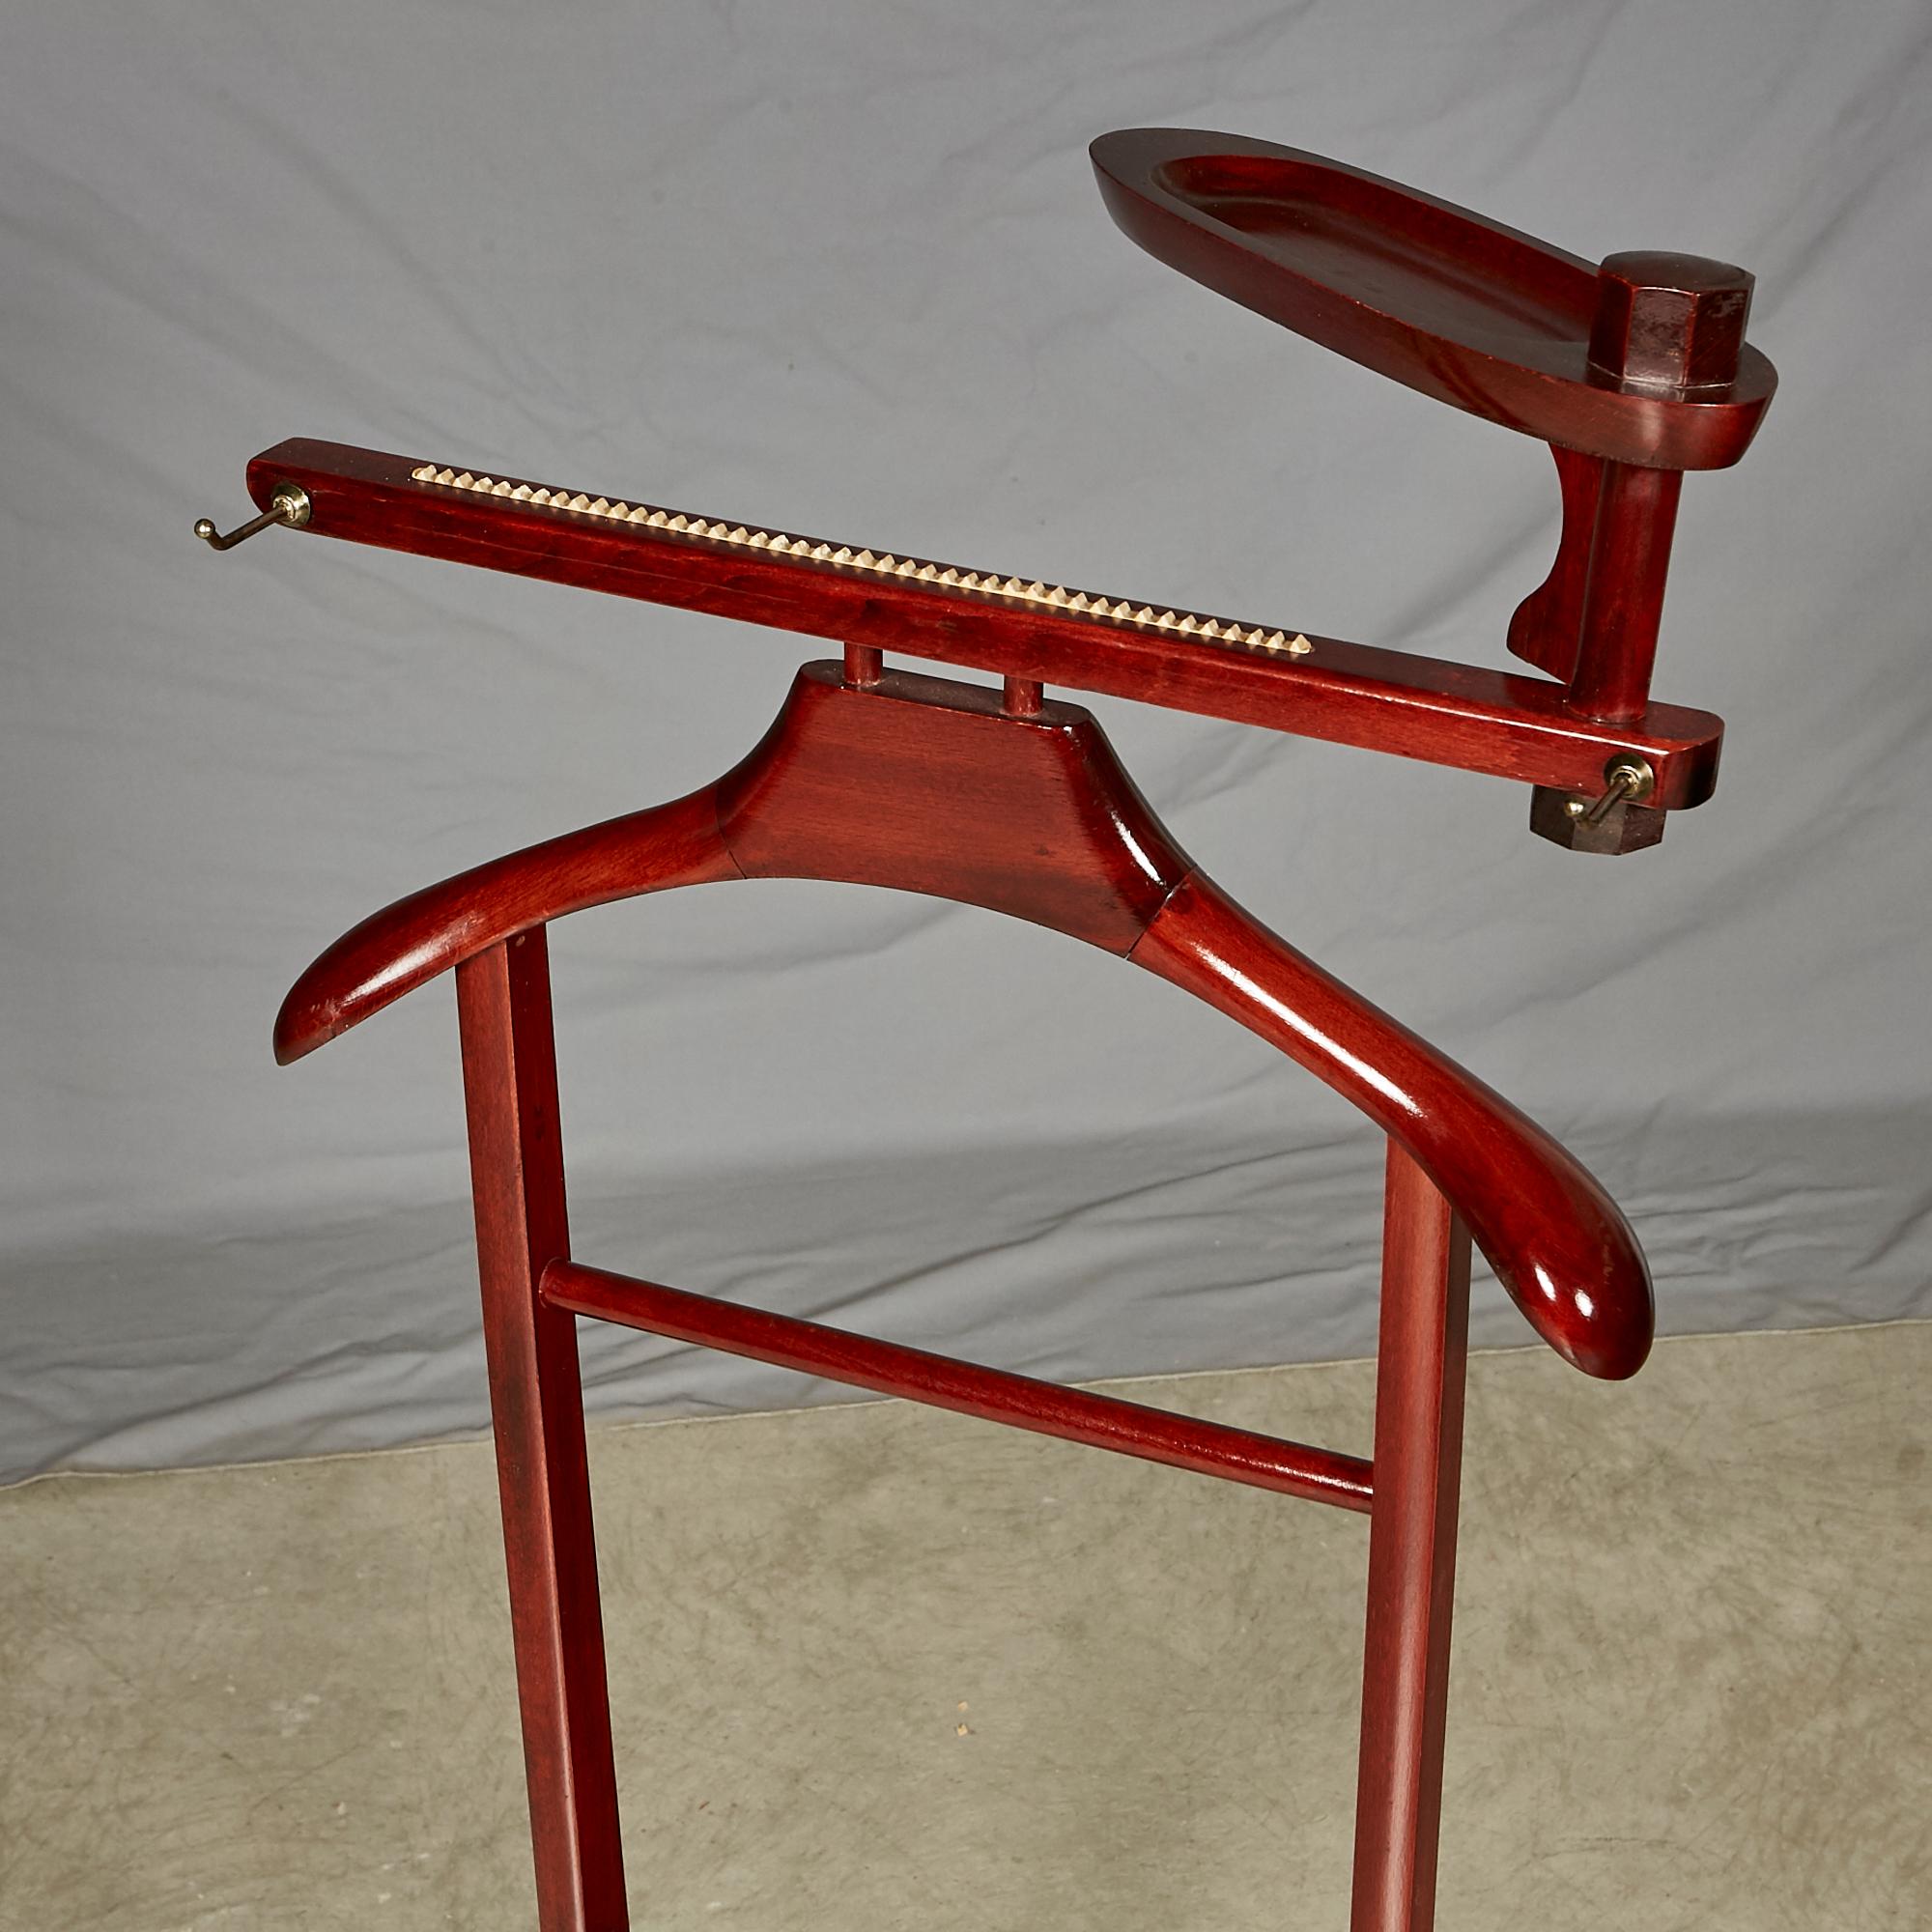 1960s Italian Ashwood Valet In Excellent Condition For Sale In Amherst, NH